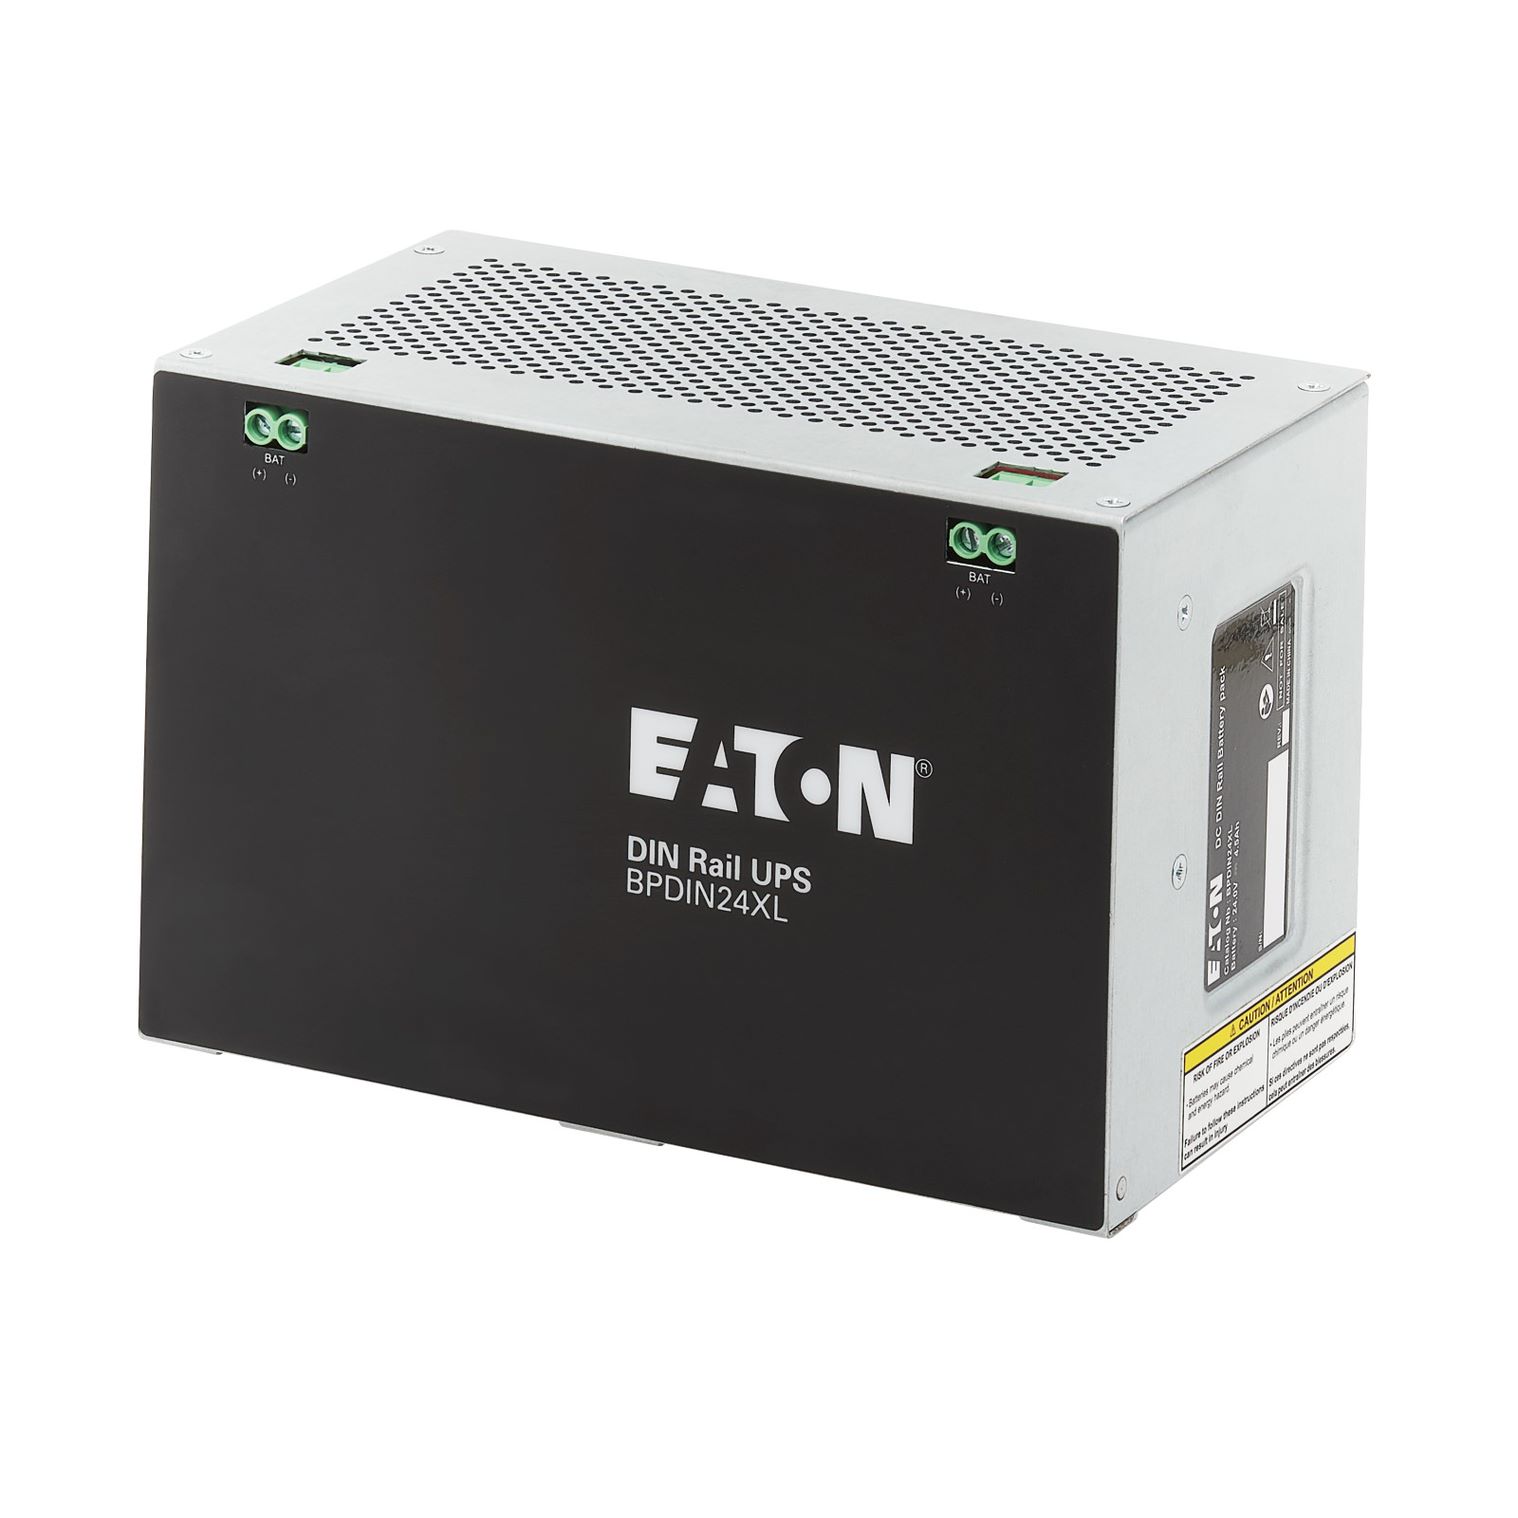 Eaton Delivers Reliable, Flexible Power Protection for Connected Devices in Industrial Environments